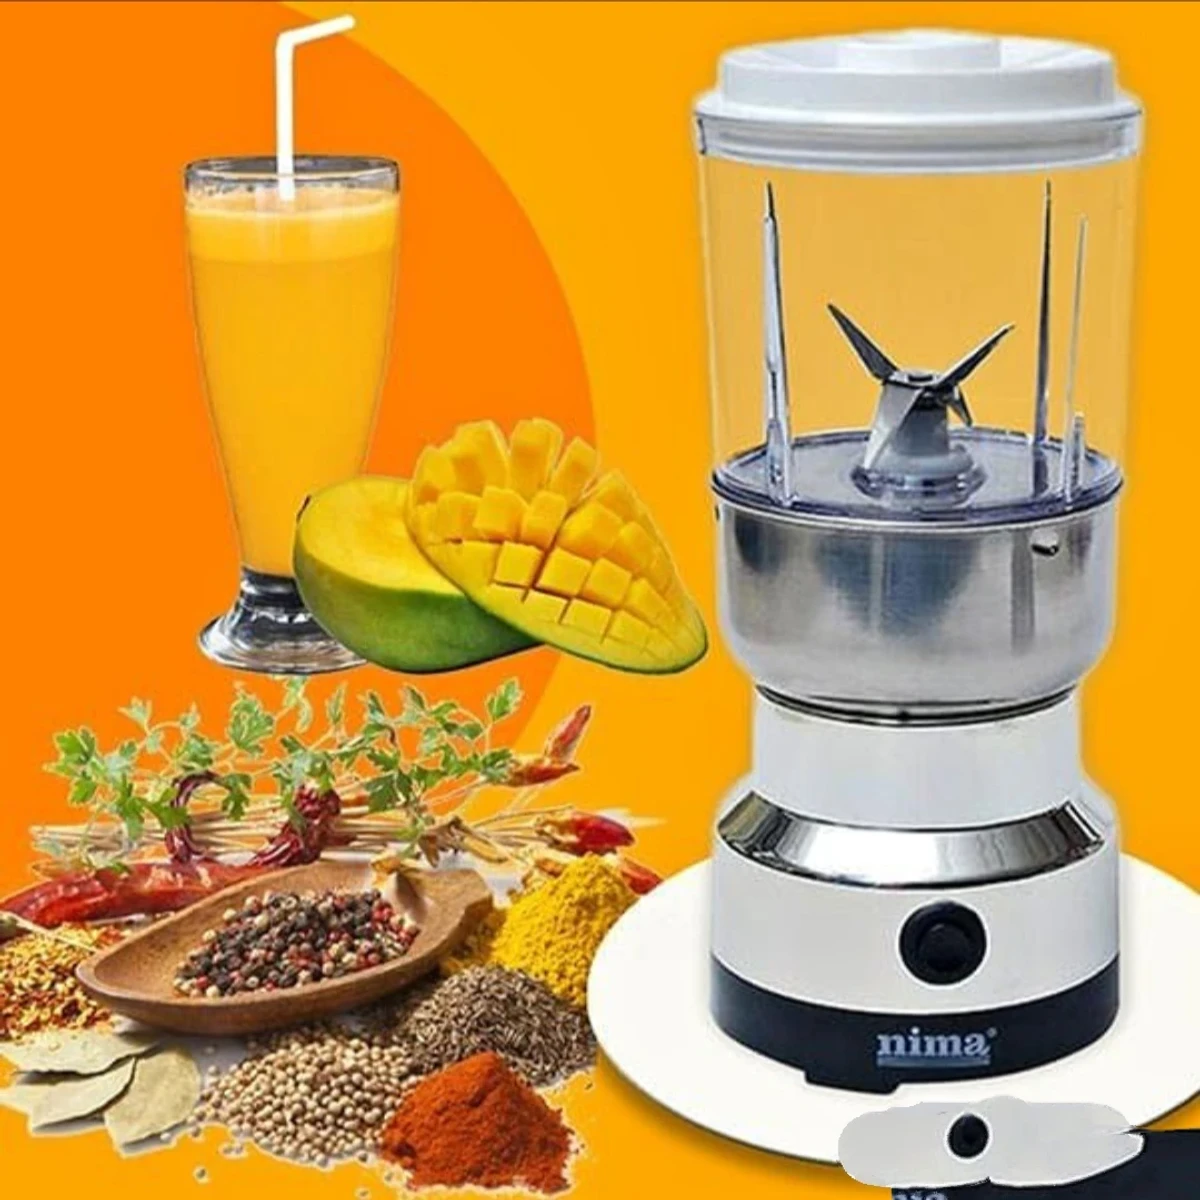 Nima 350W Electric 2 in 1 Blender and Grinder, High Quality Heavy Duty Blender and Mixer Grinder